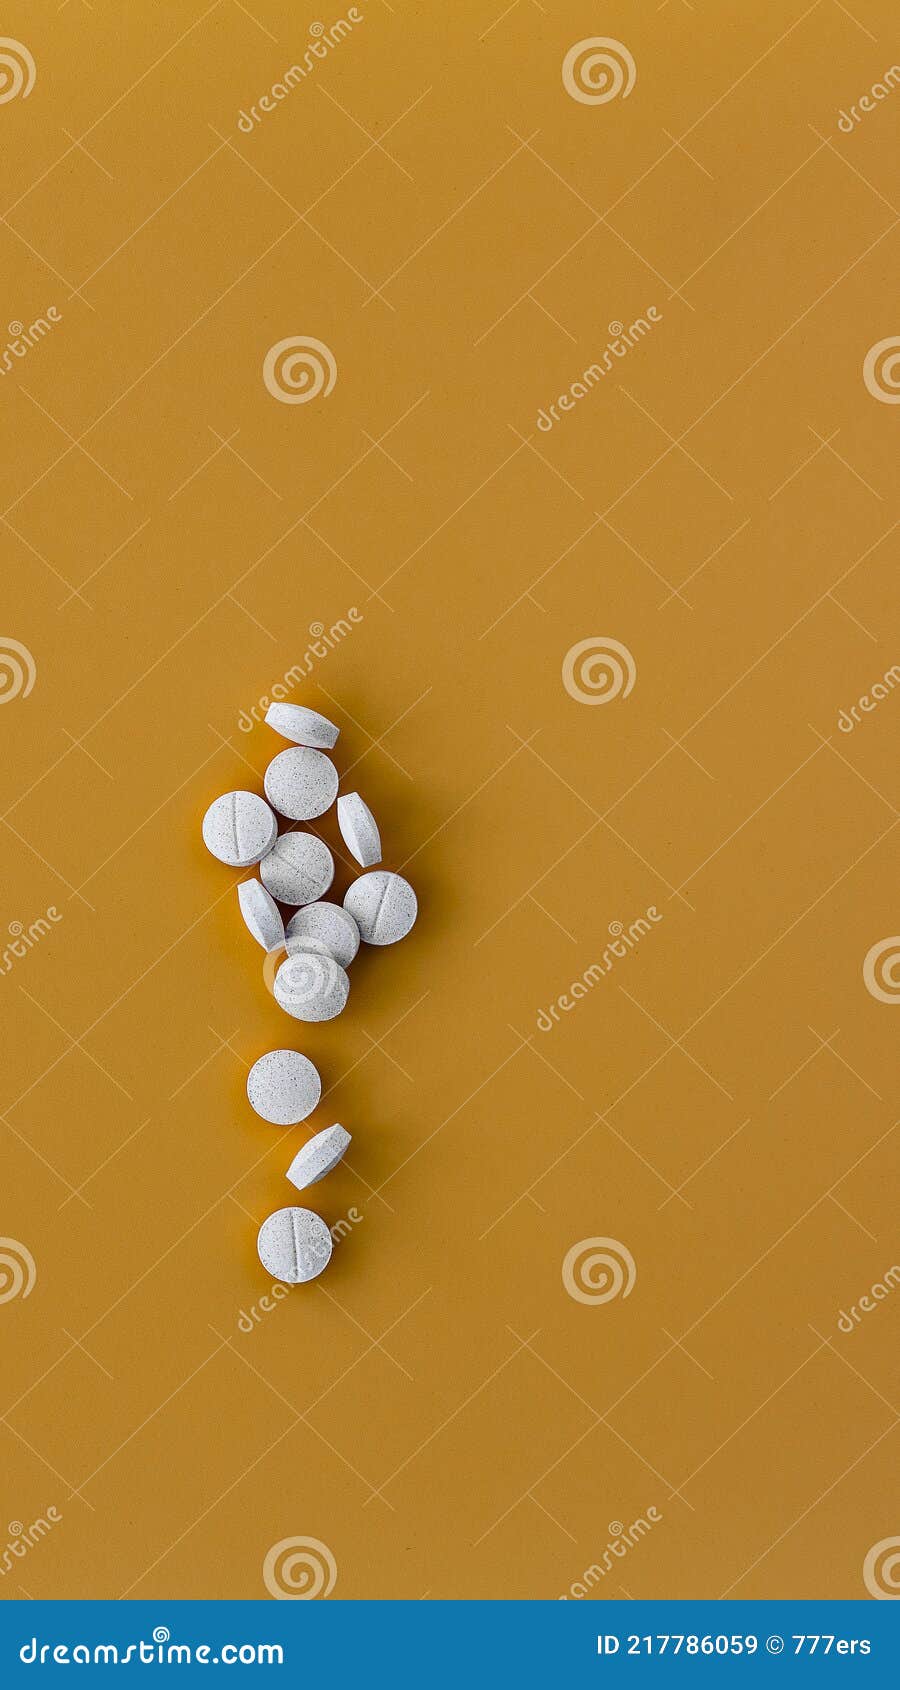 close-up of methylcobalamin tablets. dietary concept. dietary supplement topview